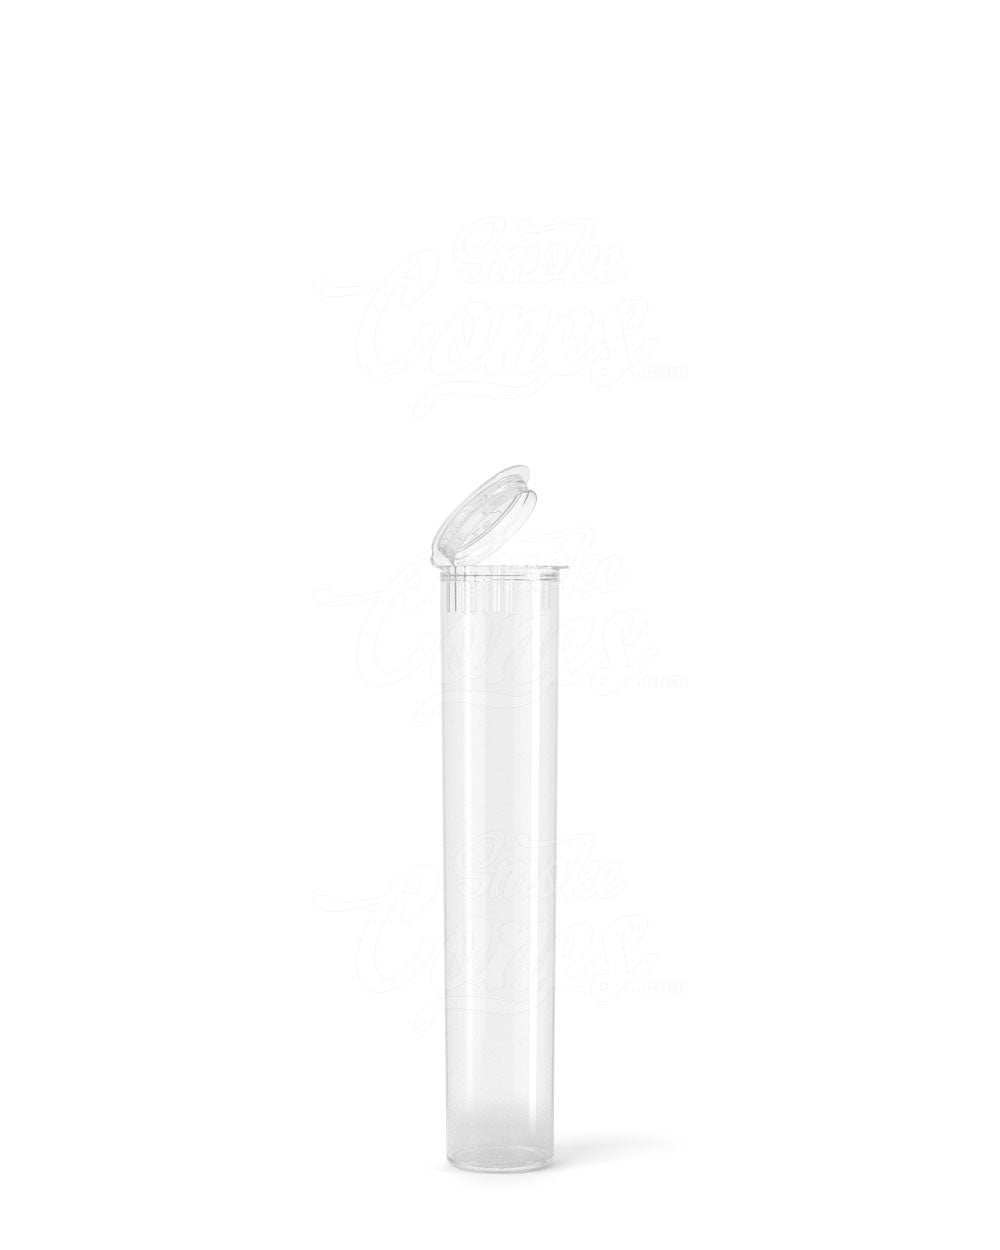 70mm Clear Opaque Child Resistant Pop Top Plastic Pre-Roll Tubes 1000/Box - 1